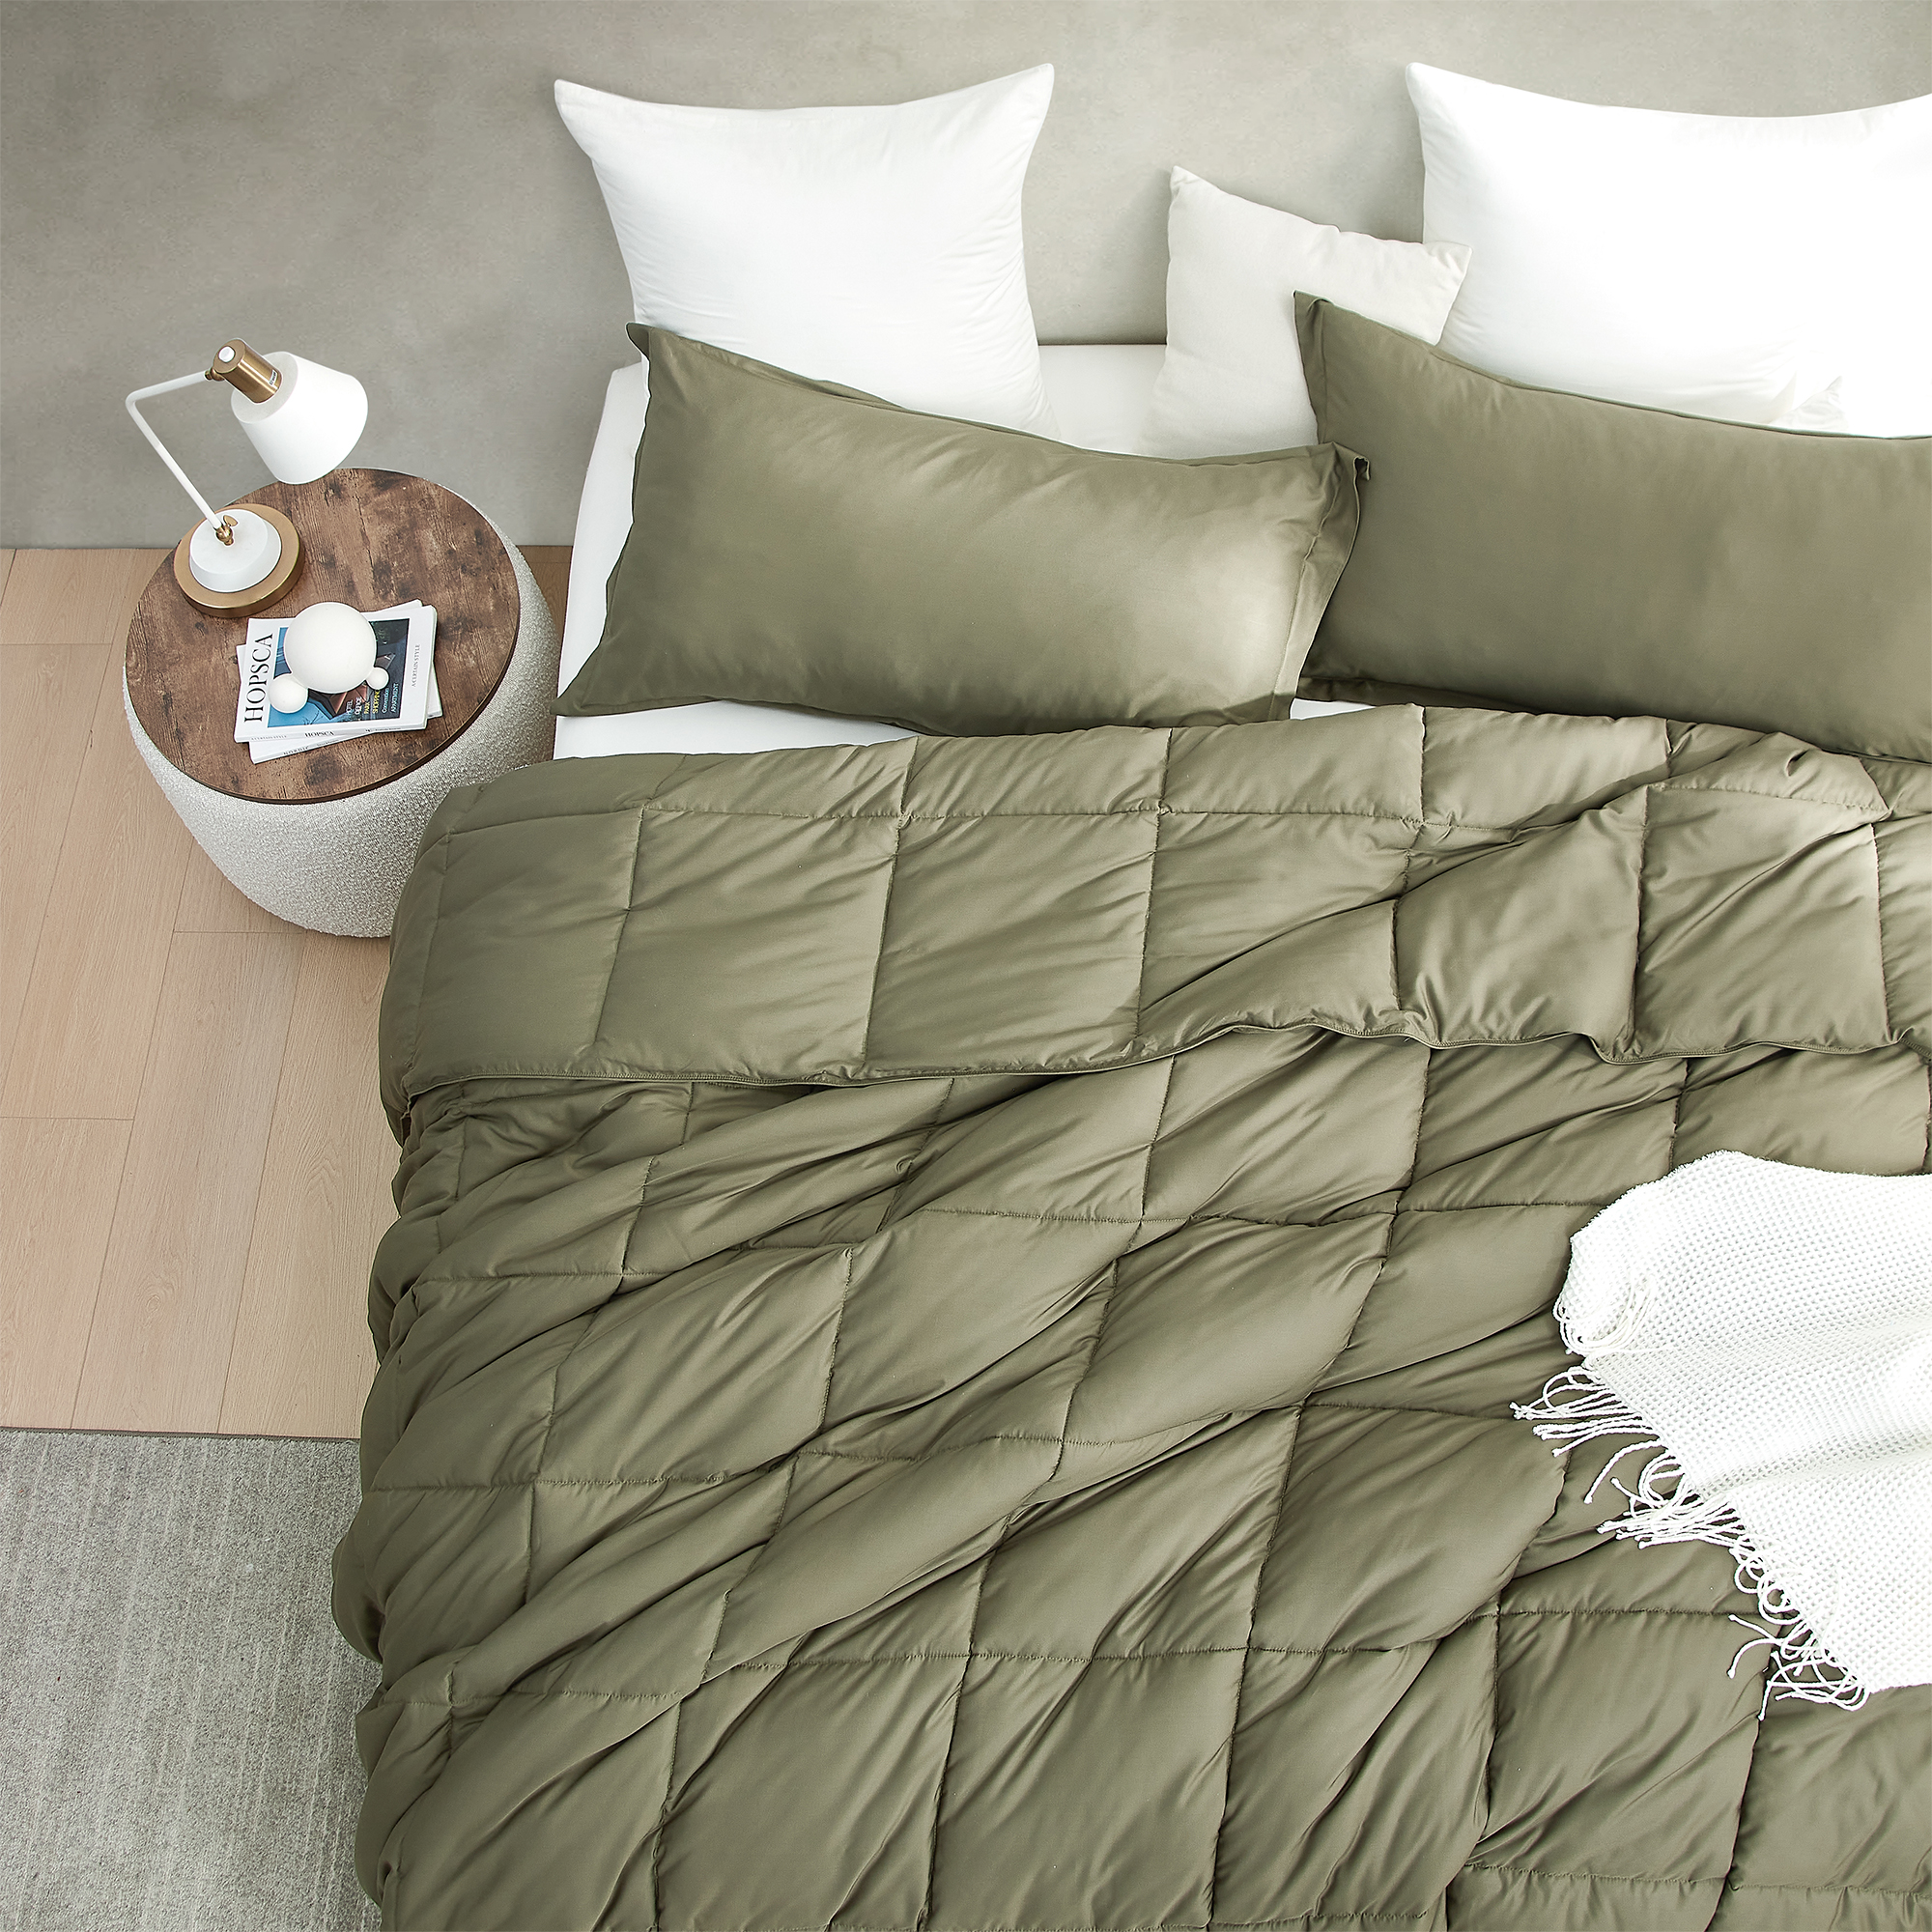 Snorze Cloud Comforter - Coma Inducer Ultra Cozy Bamboo - Oversized Comforter in Burnt Olive